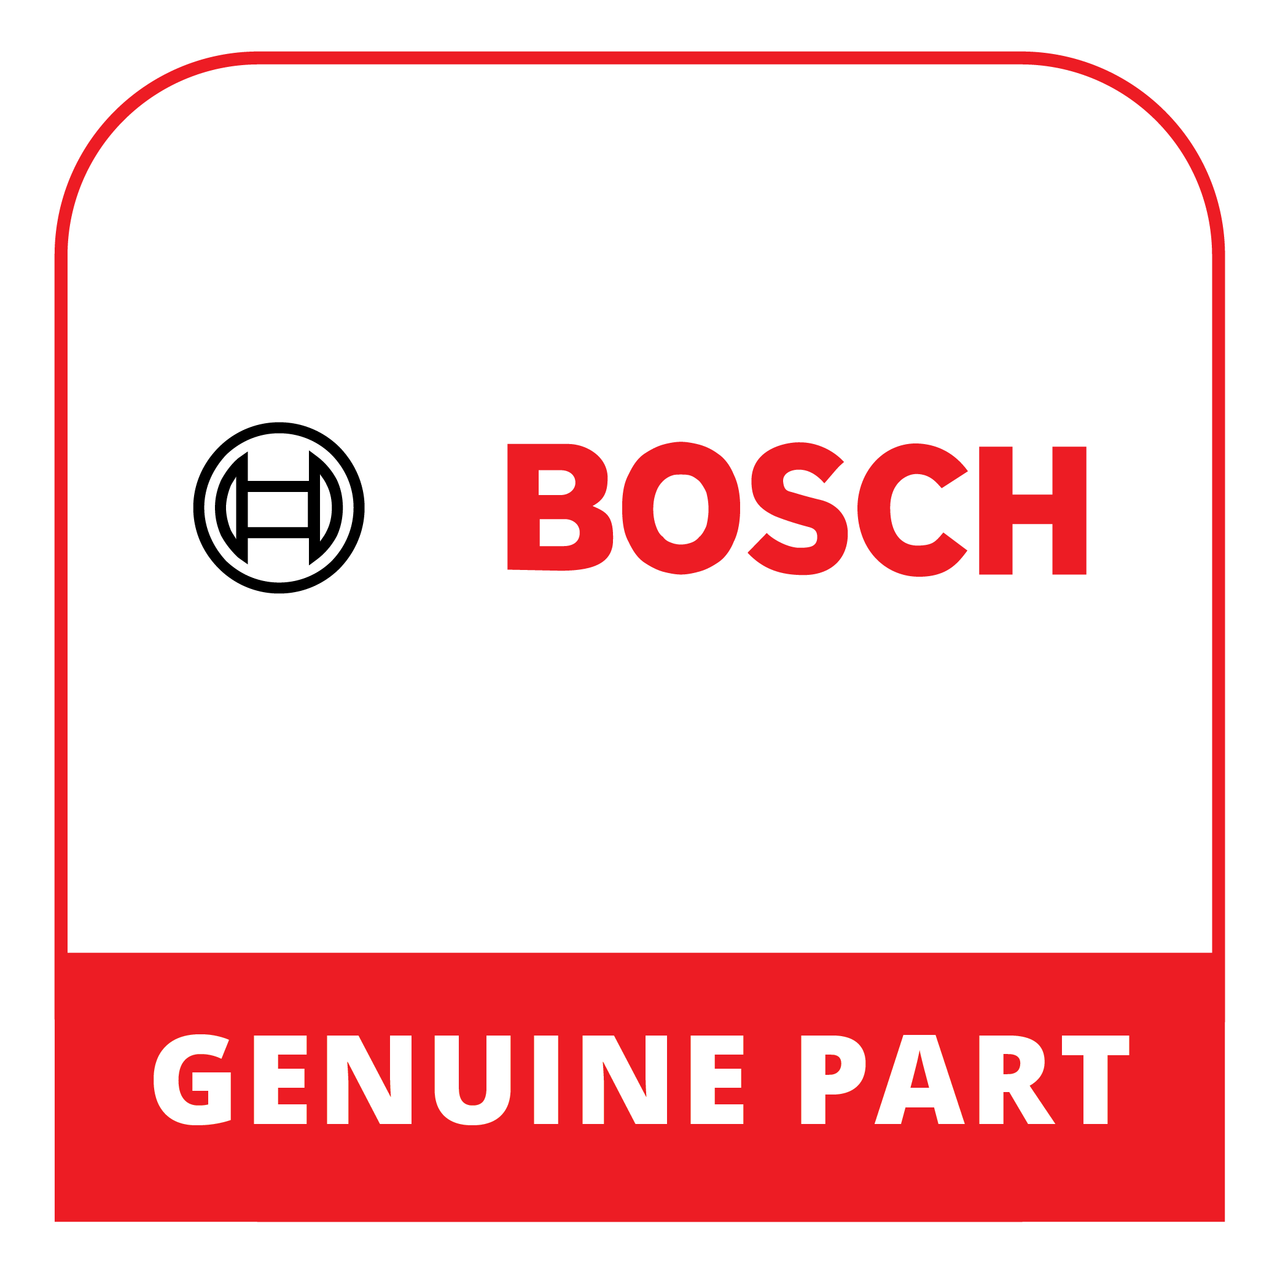 Bosch (Thermador) 12028877 - Display Module Programmed - Genuine Bosch (Thermador) Part